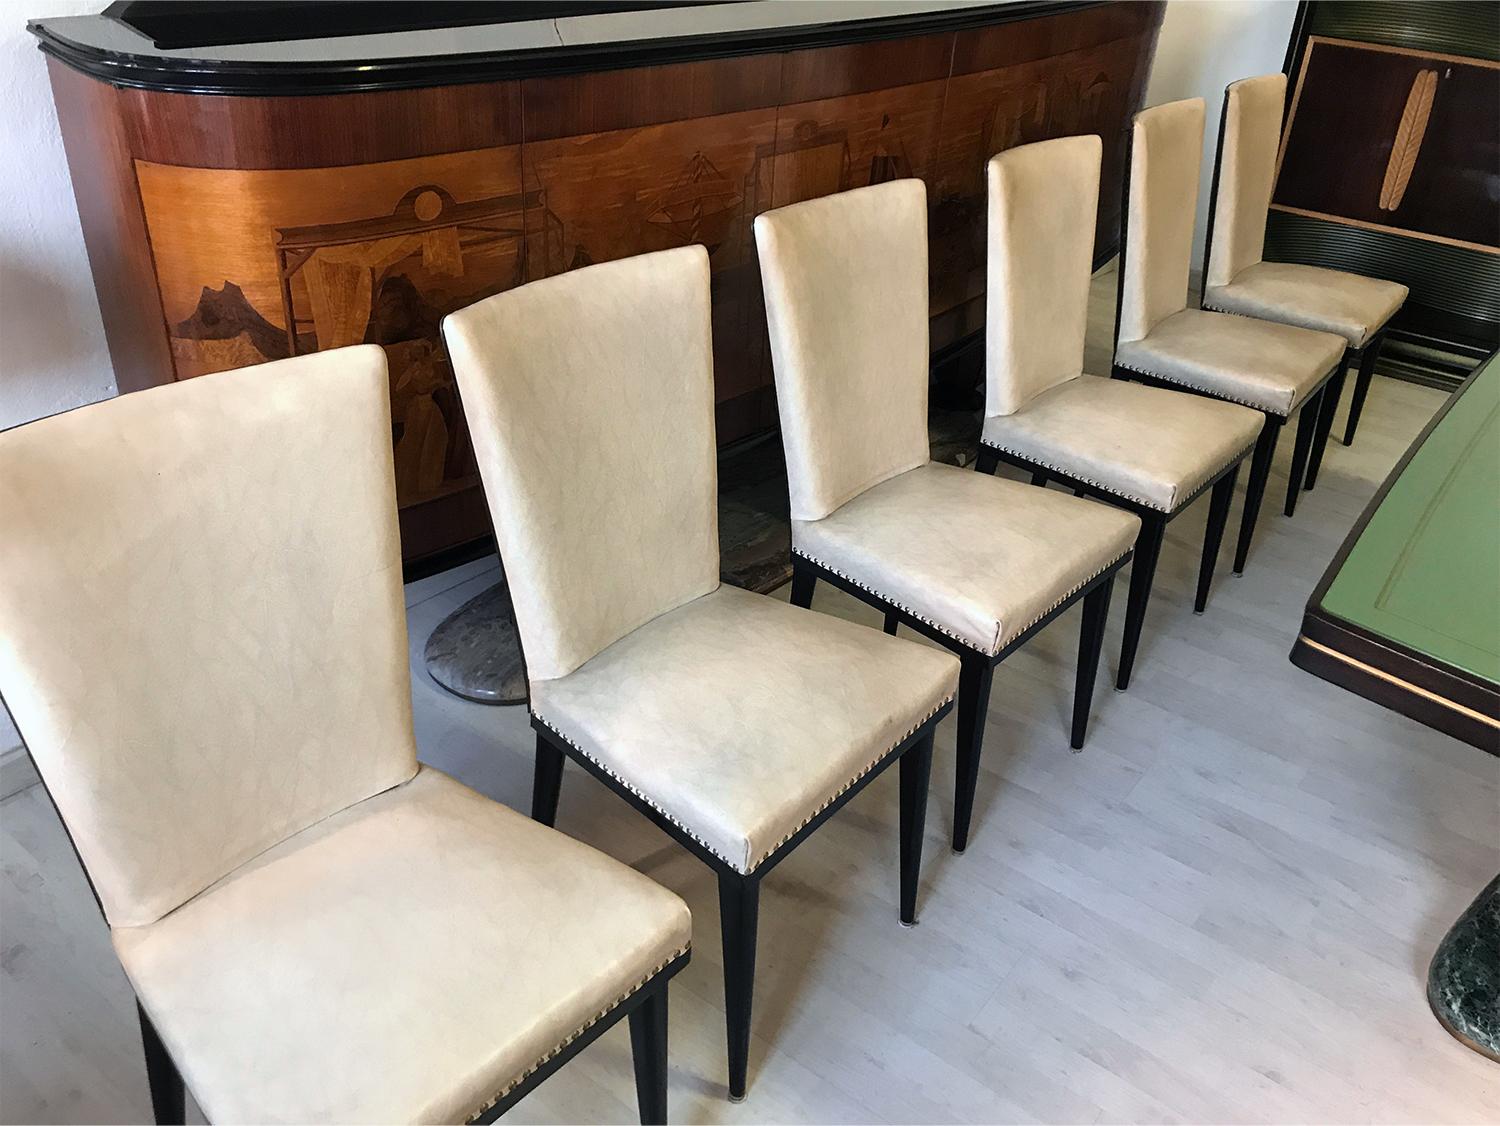 Elegant lines and solid structures for this set of six dining chairs designed by Vittorio Dassi in the 1950s, upholstered with leatherette in a beautiful pearl gray color.
The wood surfaces, as well the upholstery, springs and padding are in very